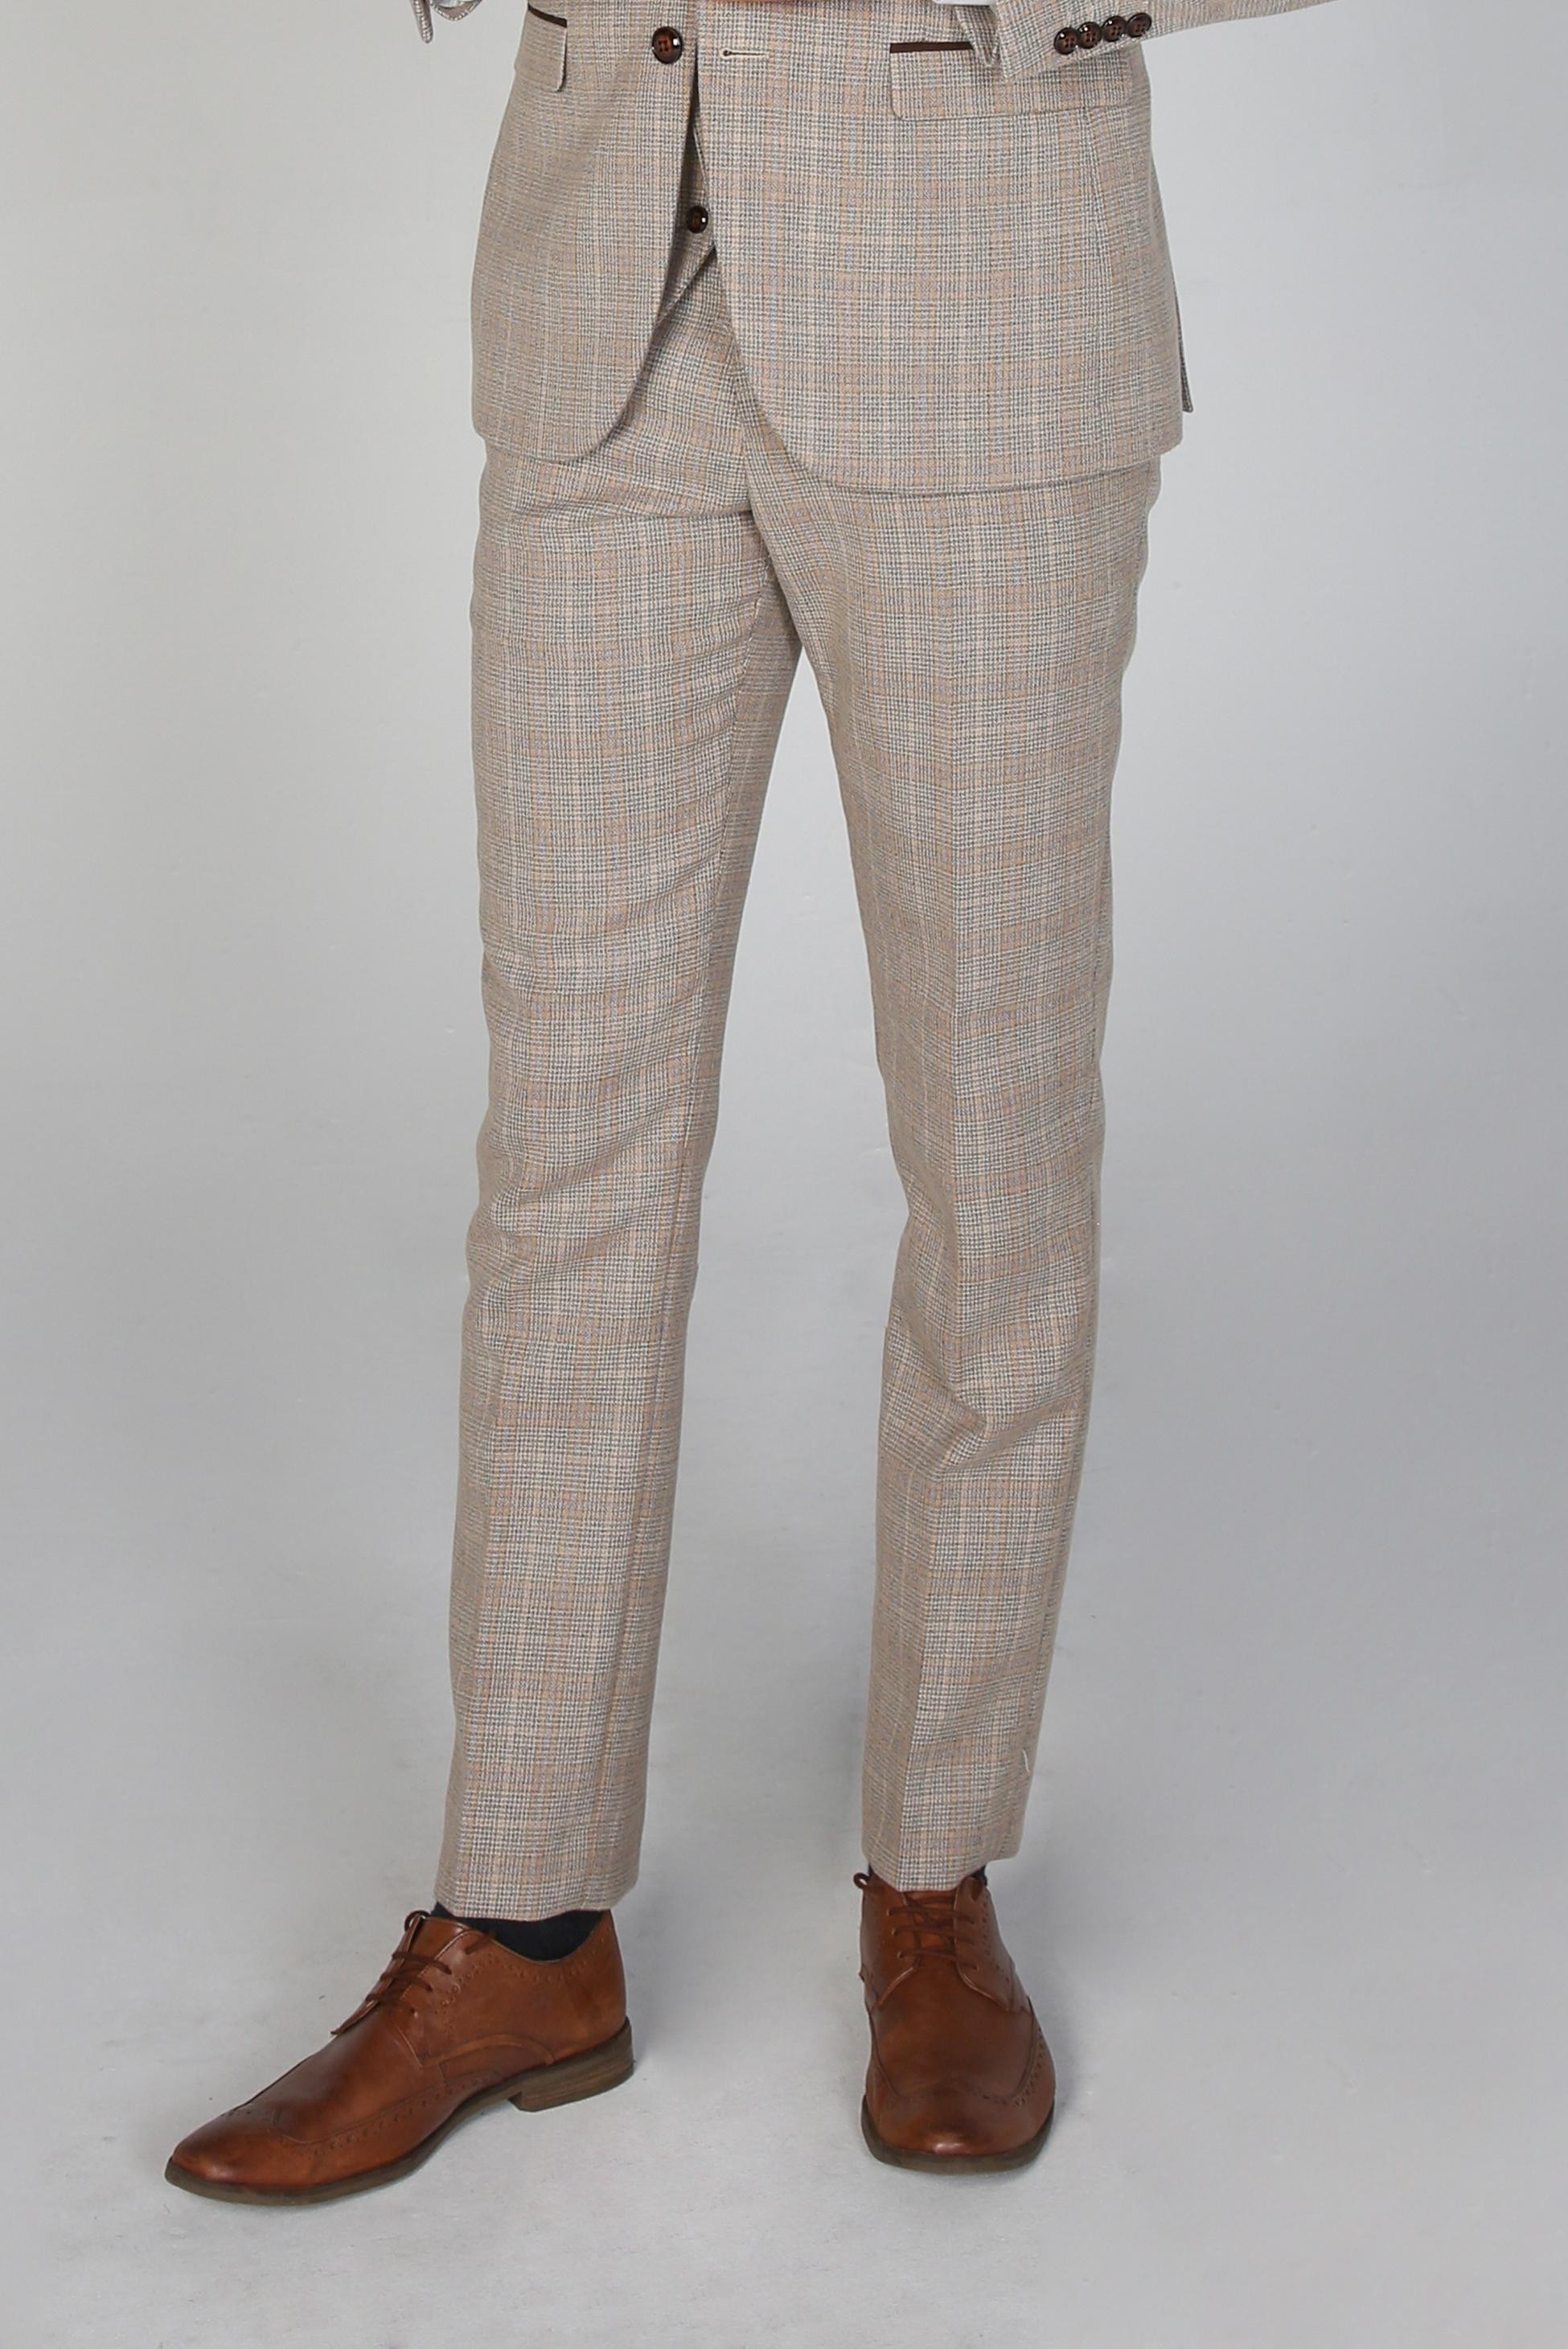 Men's Houndstooth Tweed Check Pants - HOLLAND